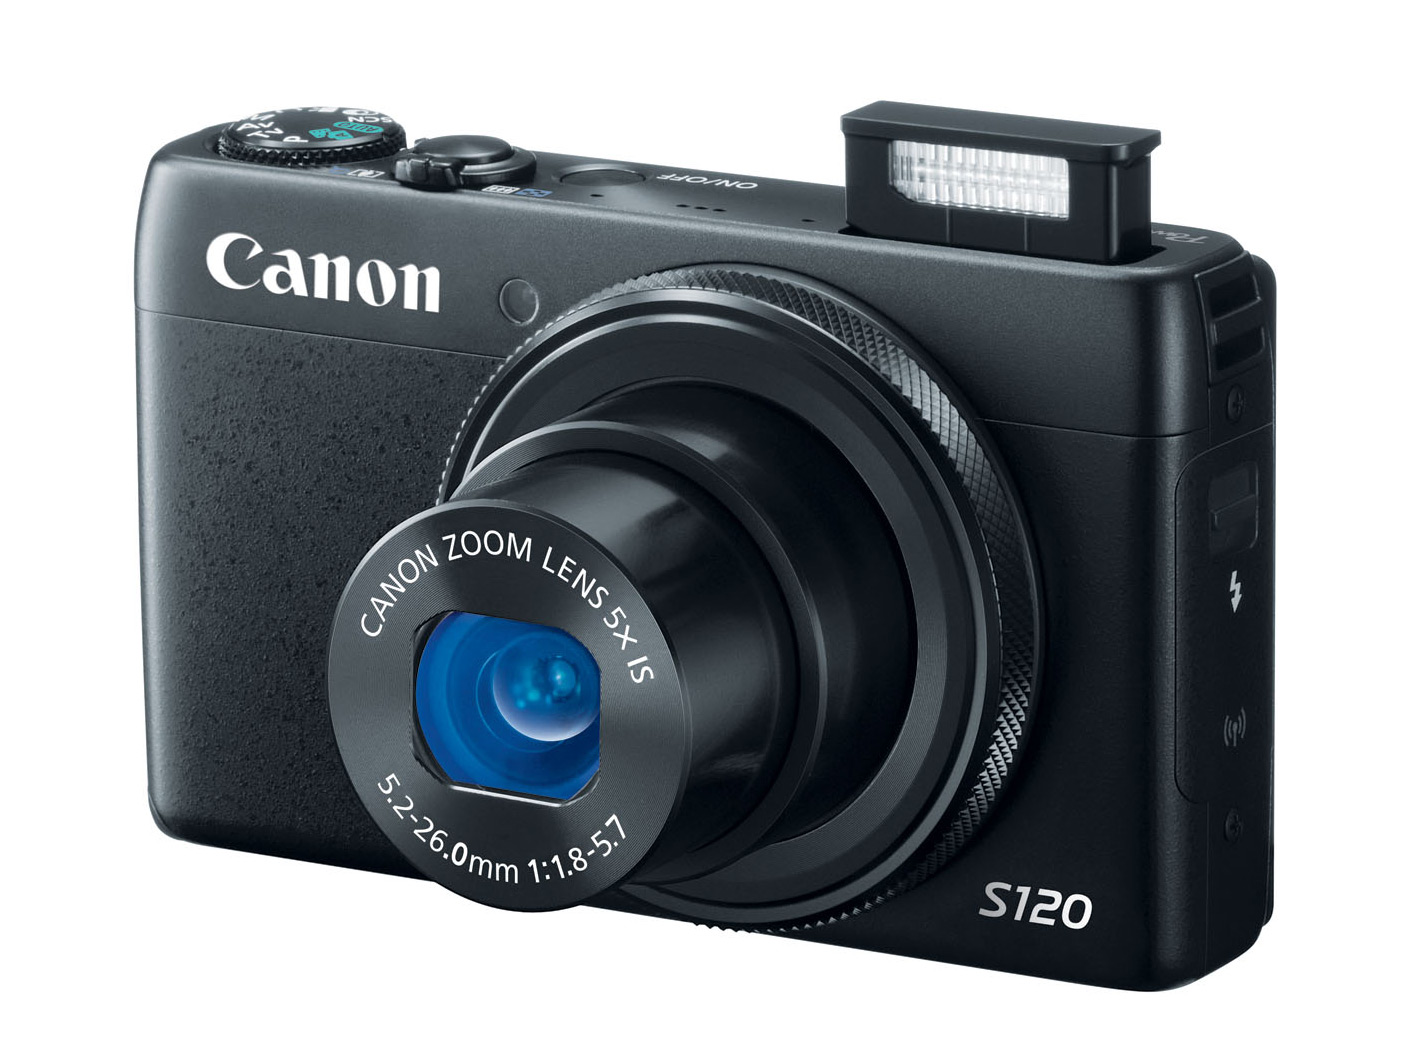 Canon PowerShot S120 Price, Specs, Release Date, Where to Buy | Camera